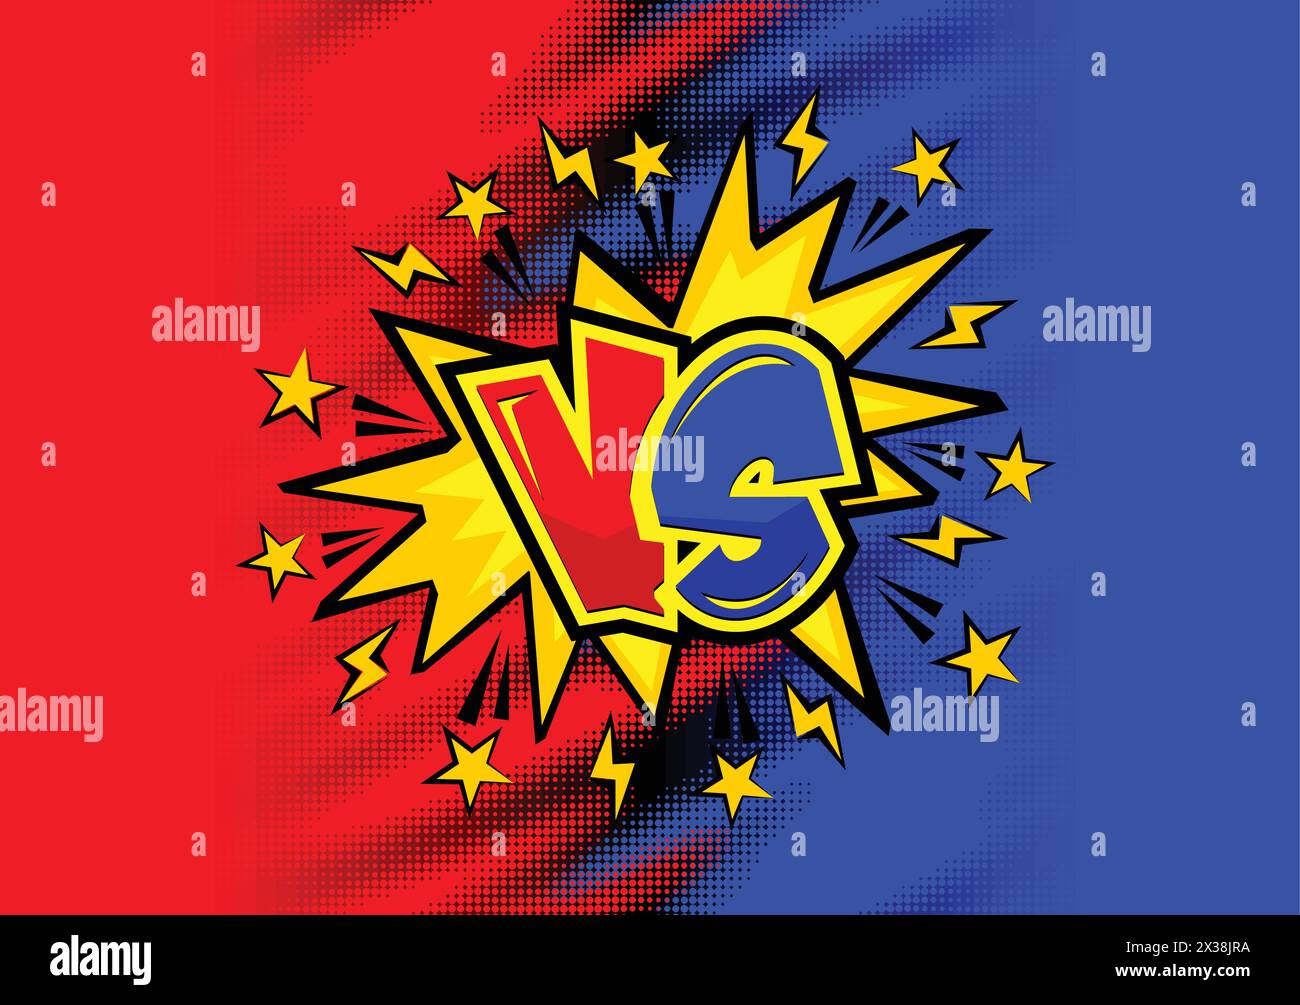 VS fight background for battle, competition, election or game. Red versus blue fighter. Stock Vector